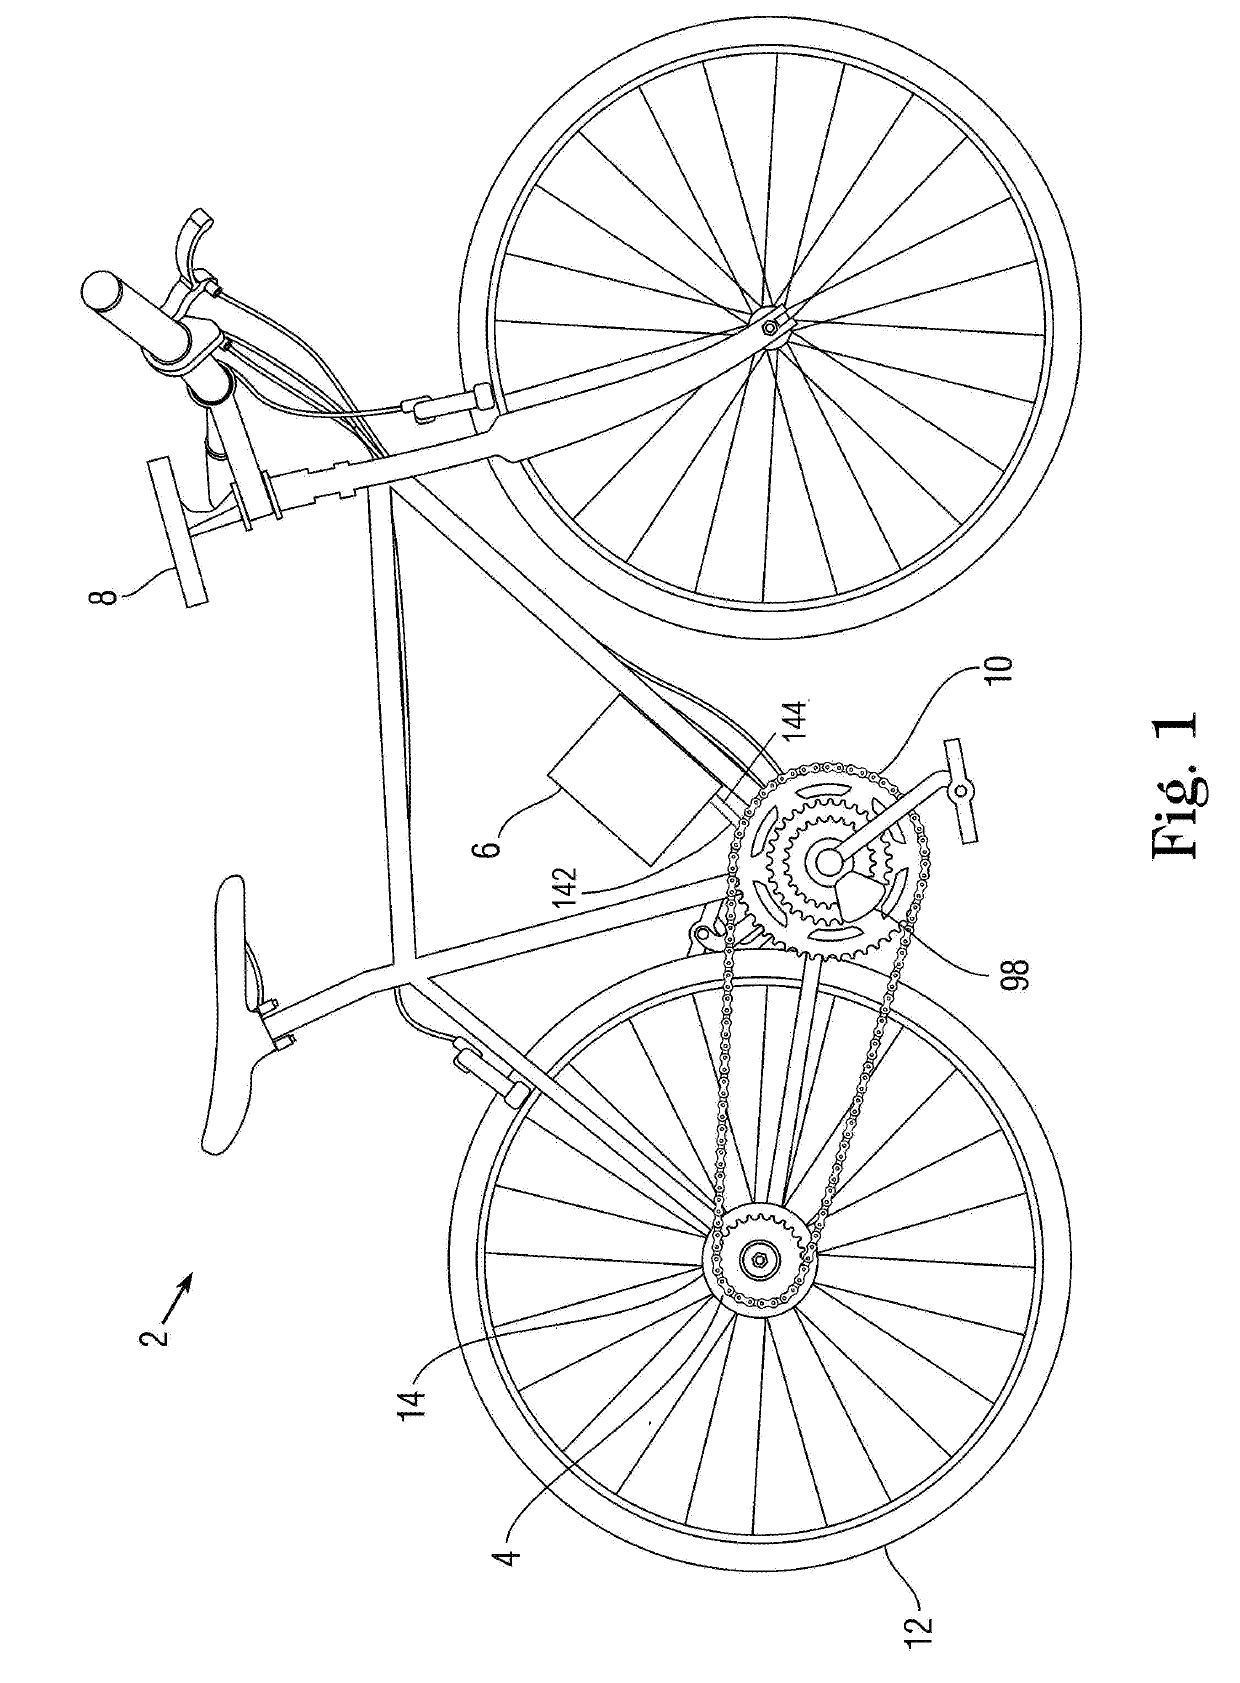 Self-shifting bicycle that shifts as a function of power output